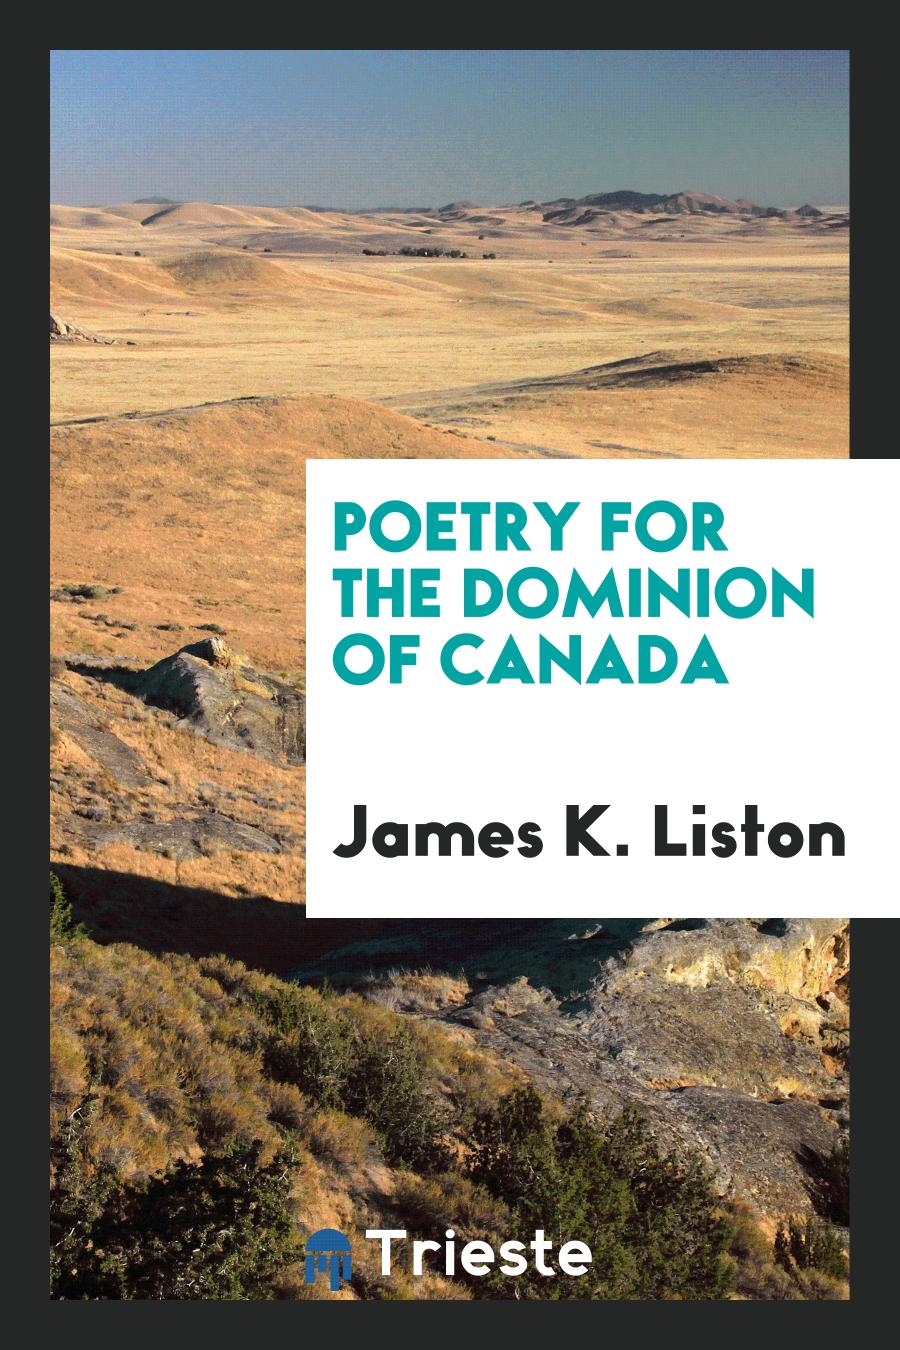 Poetry for the Dominion of Canada